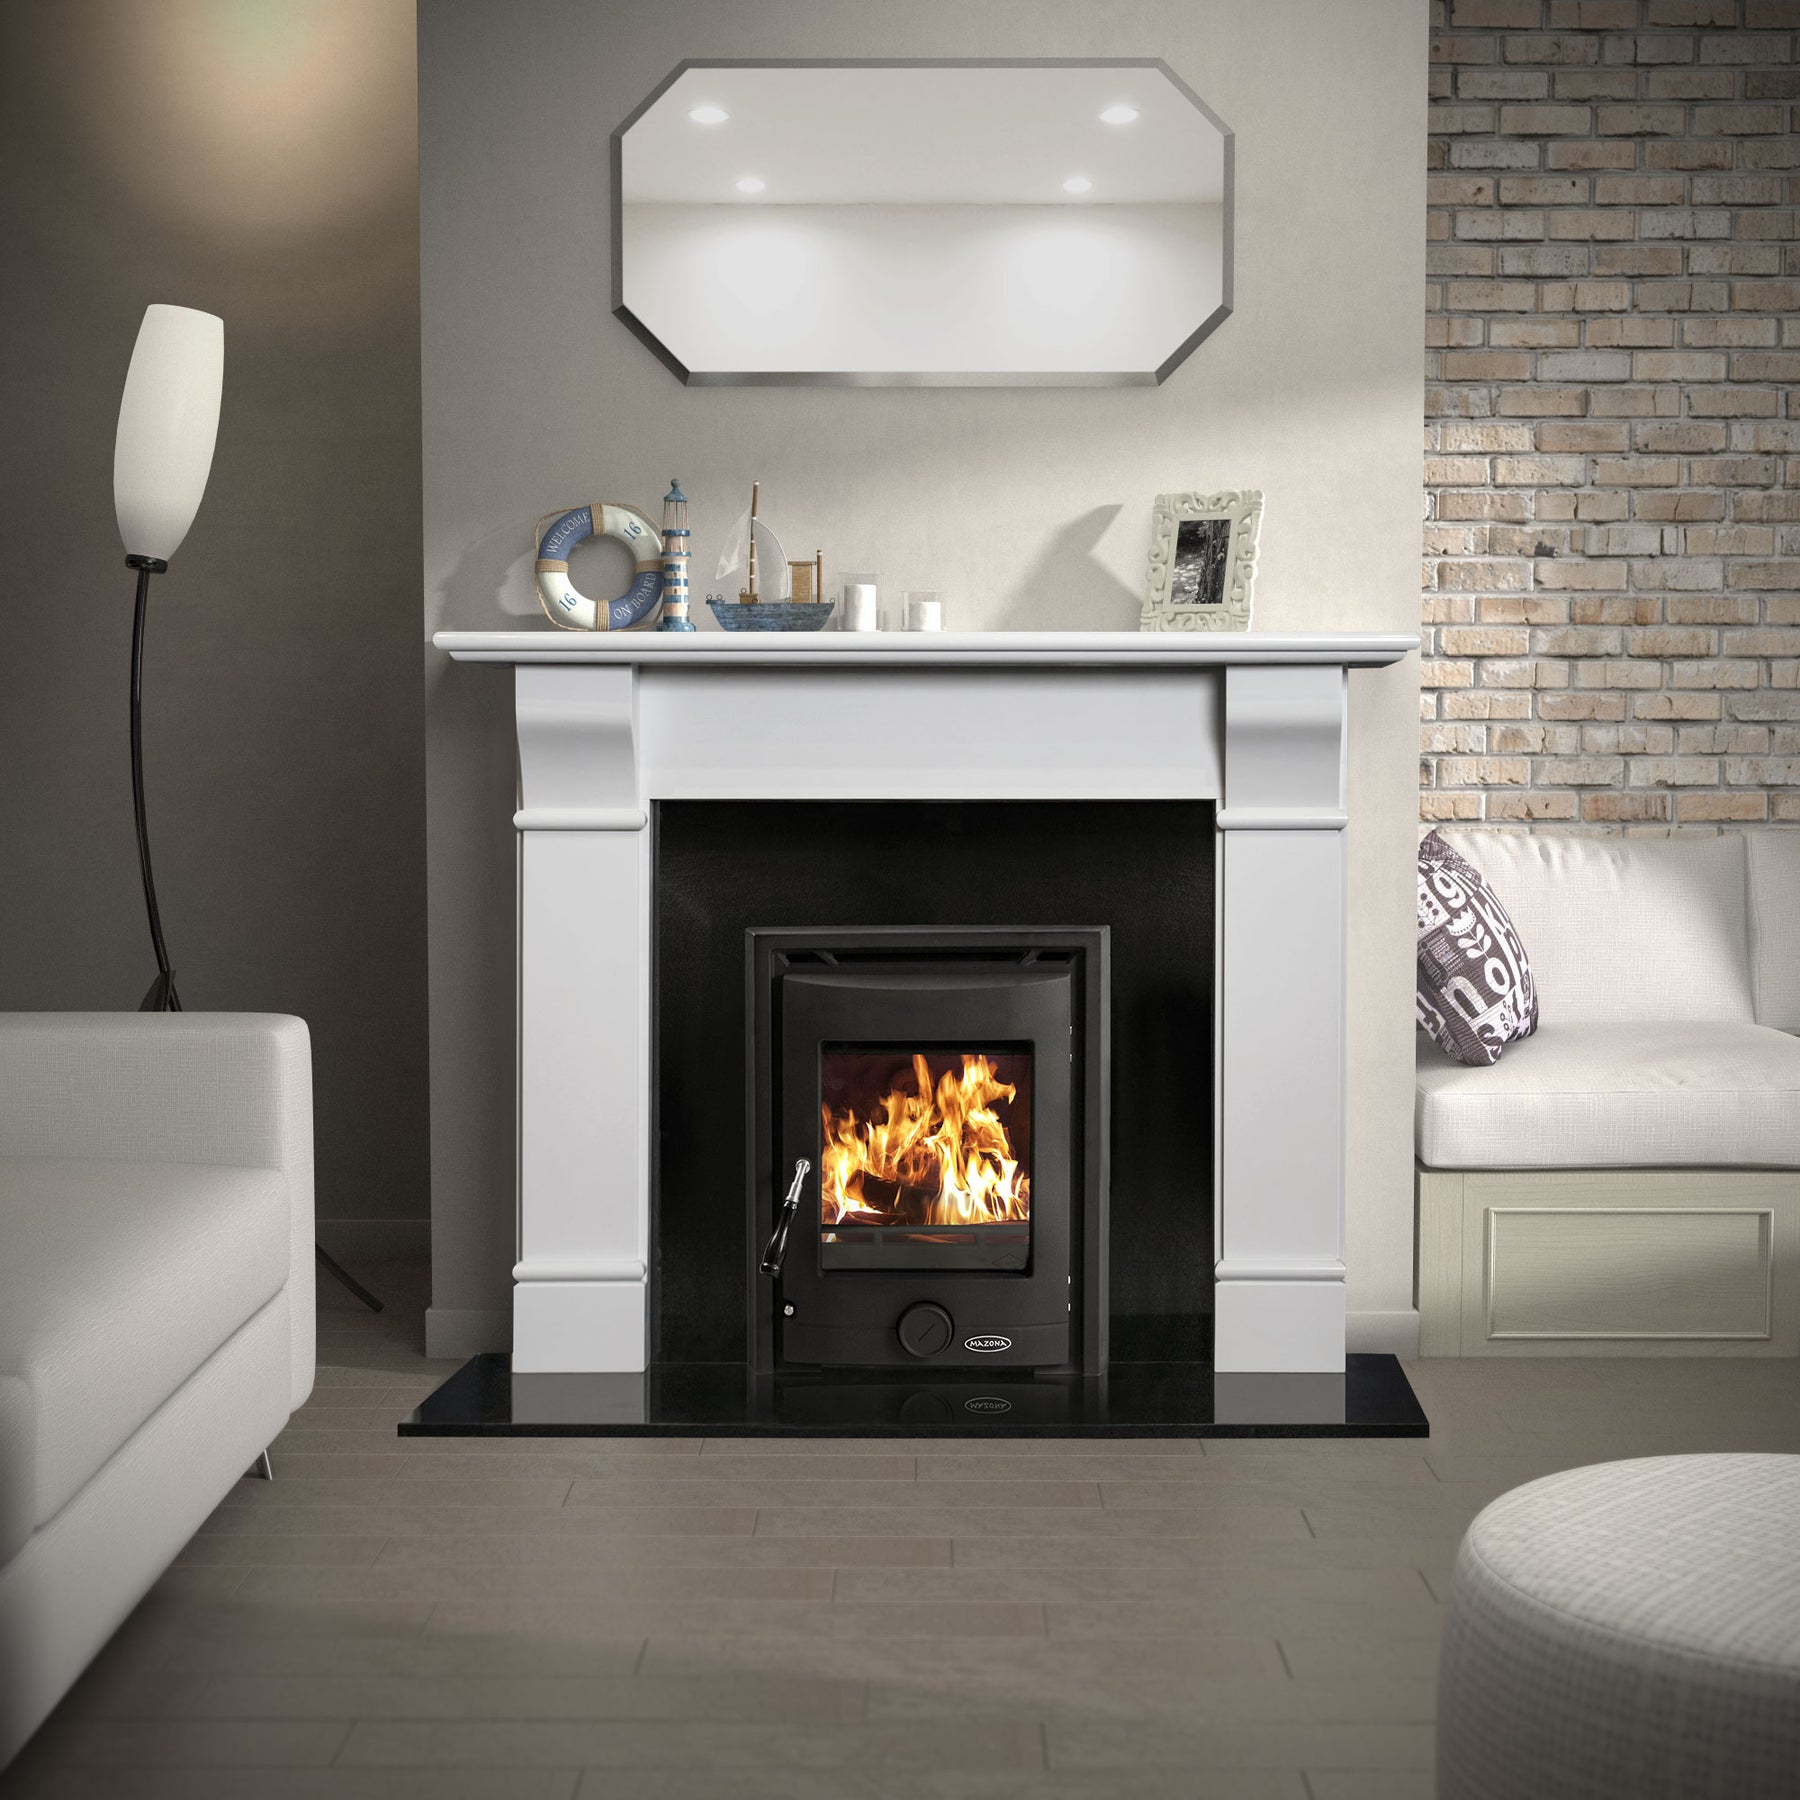 What are the Differences between Conventional Stoves and Modern Stoves